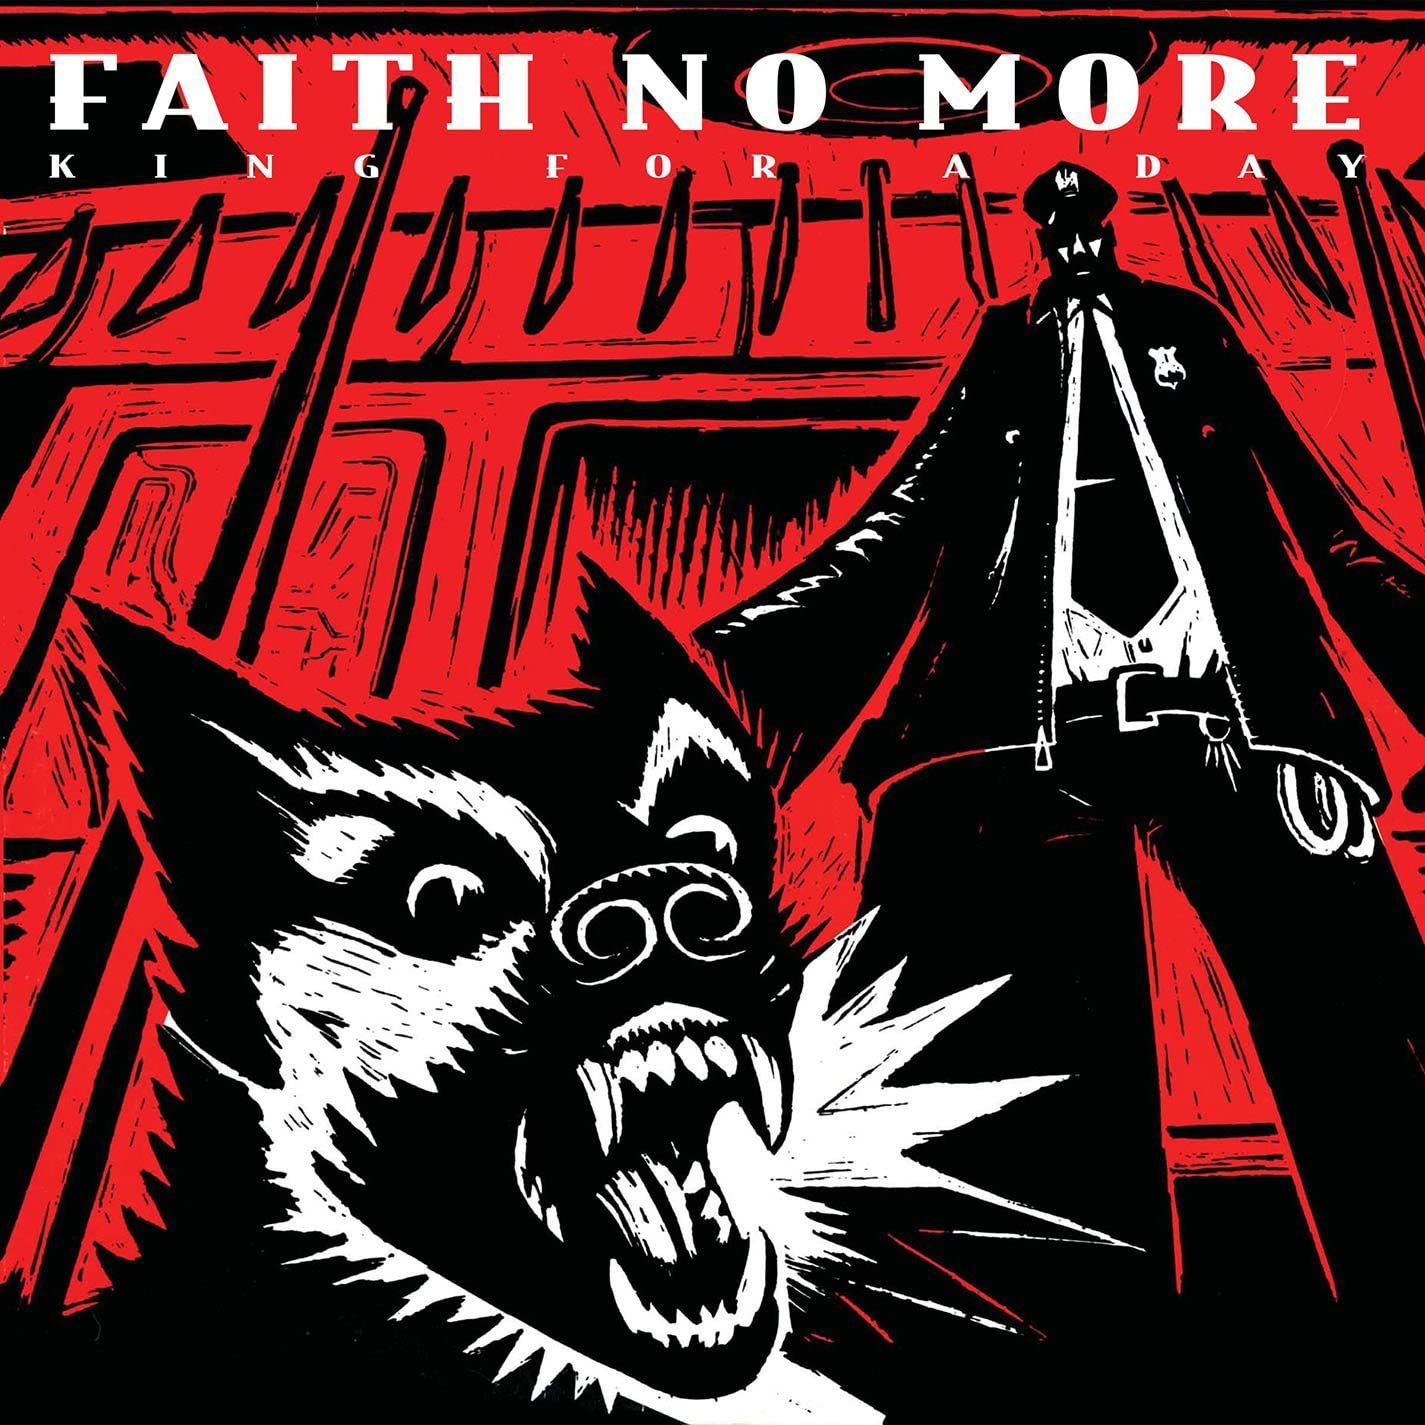 5th studio album on Vinyl from Faith No More. The album showcased a greater variety than the band's usual heavy metal leanings